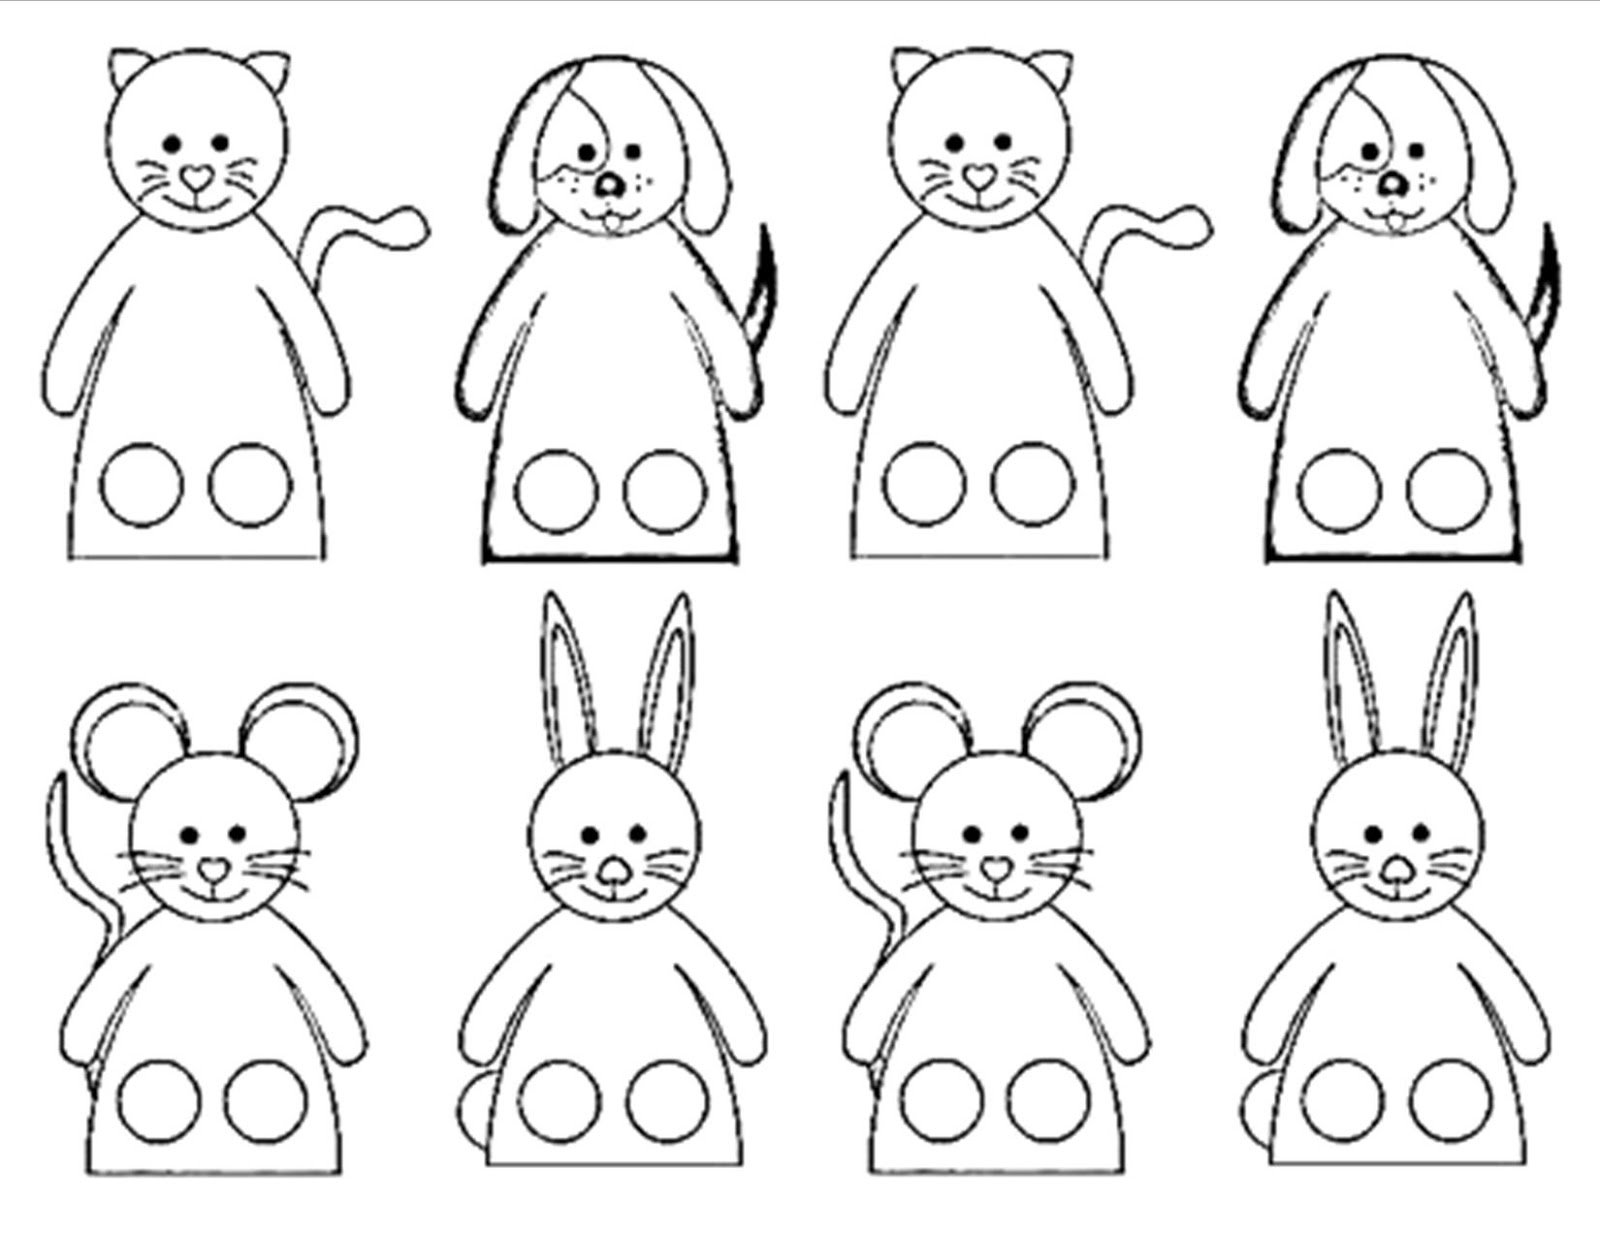 Color-lush finger theater coloring page